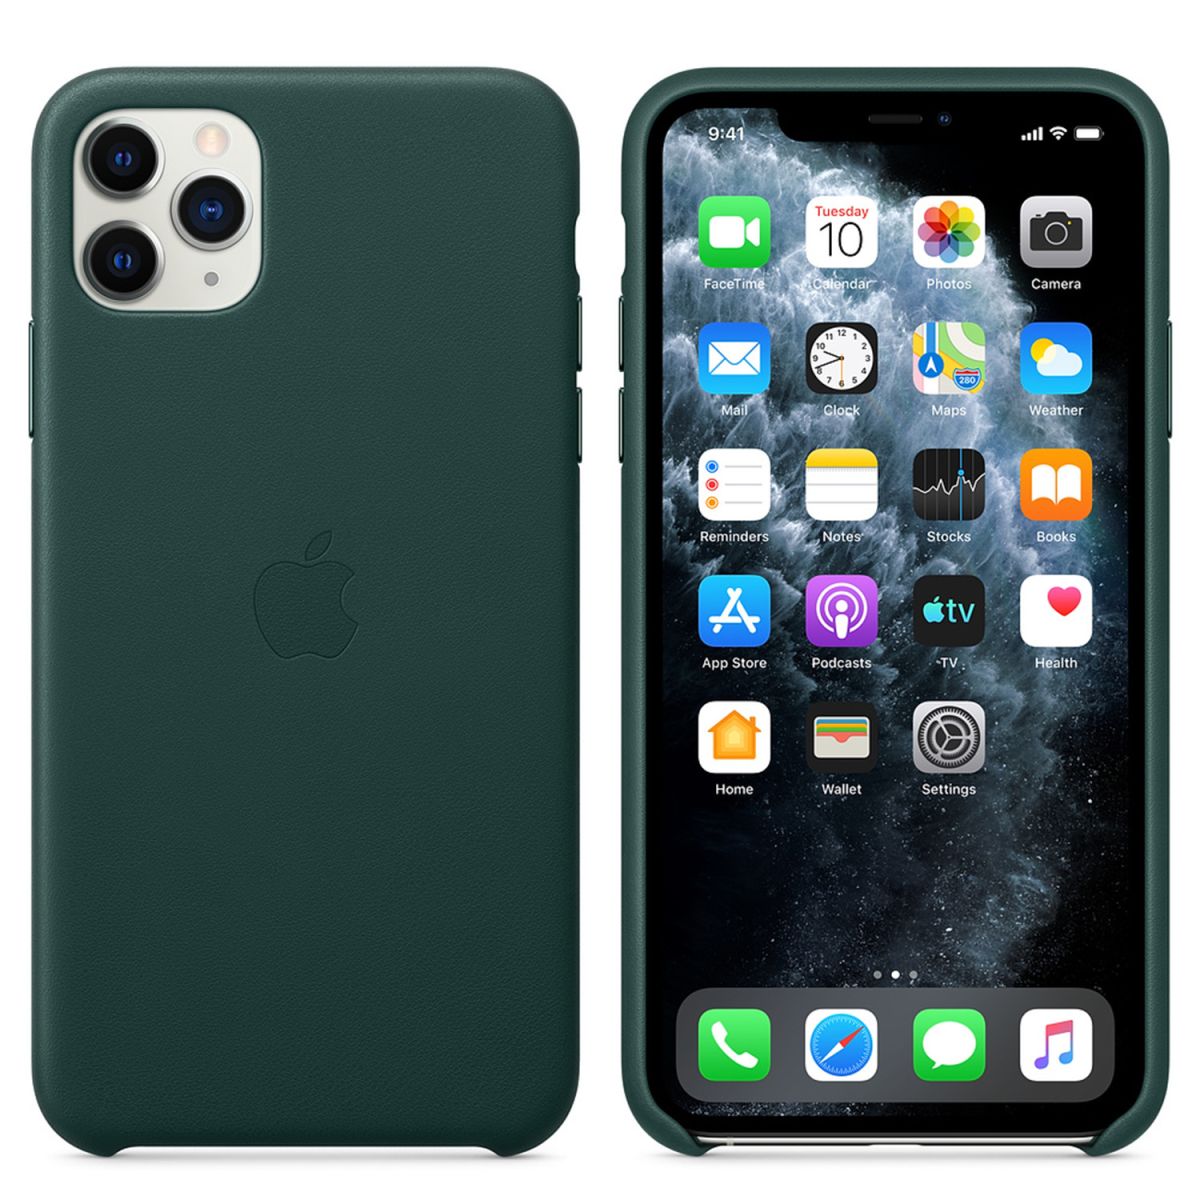 Apple Leather Backcover for iPhone 11 Pro Max - Green